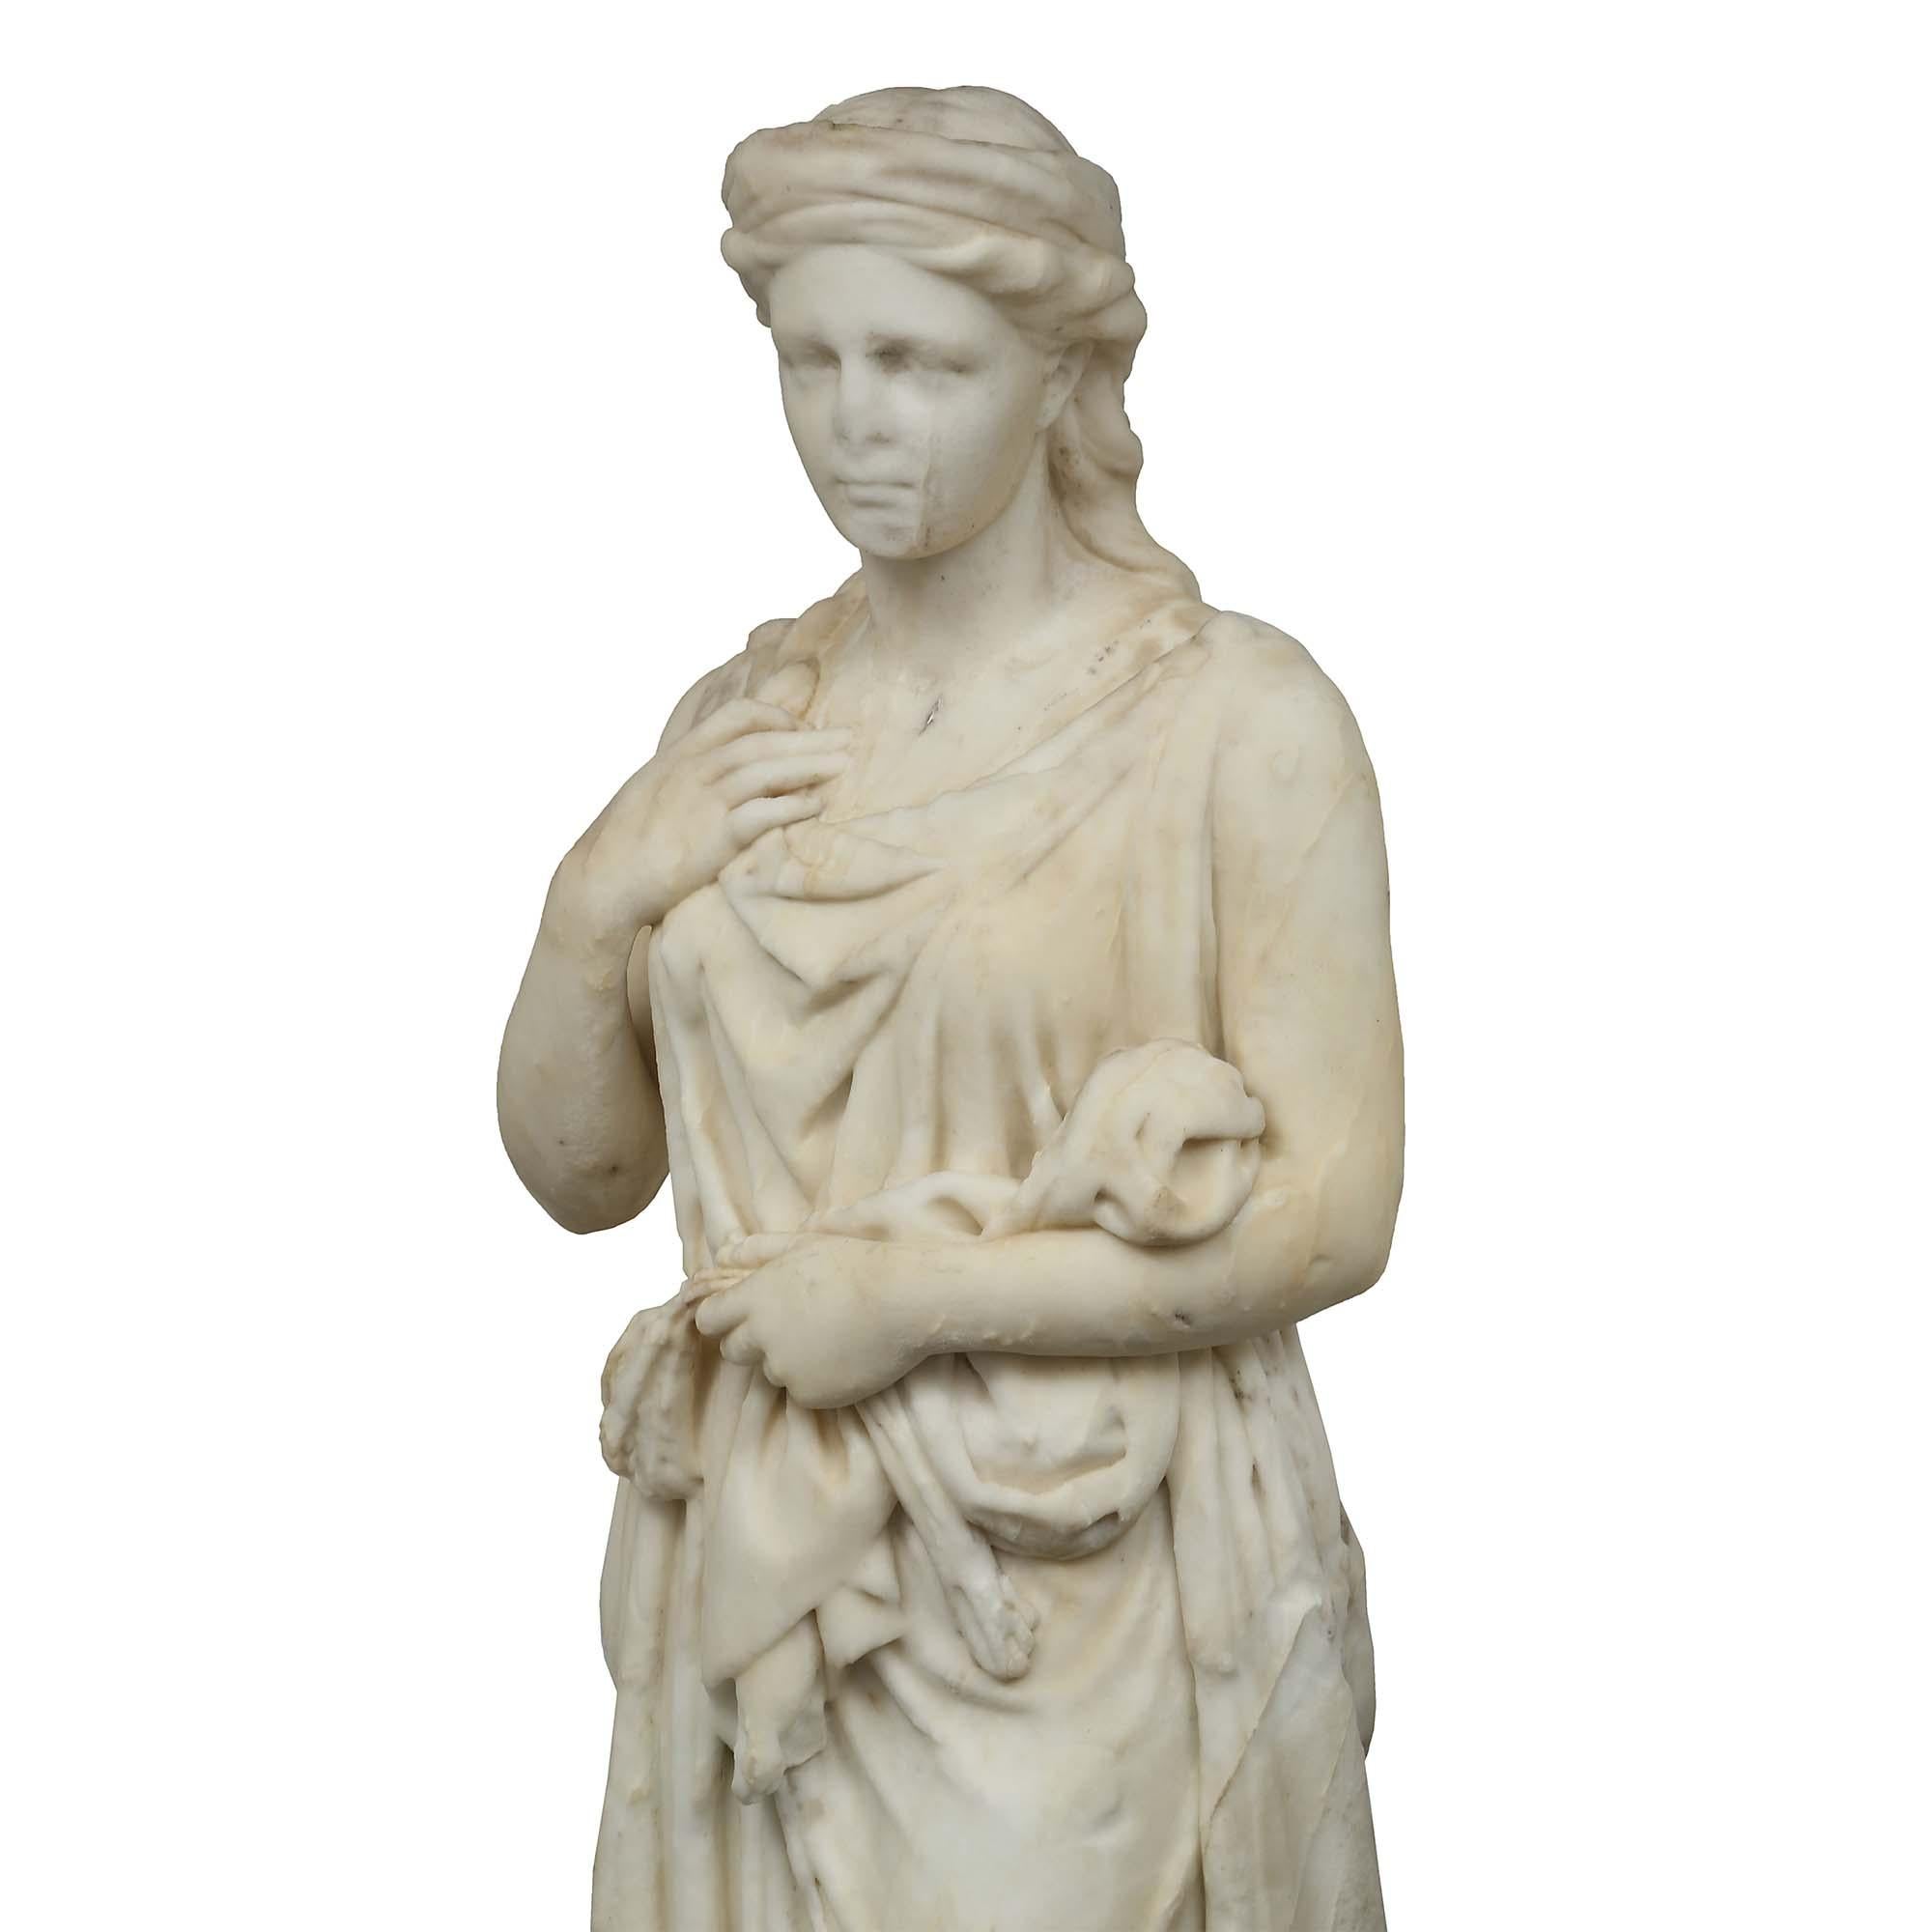 Italian Early 19th Century Solid White Carrara Marble Statue of a Young Maiden For Sale 2